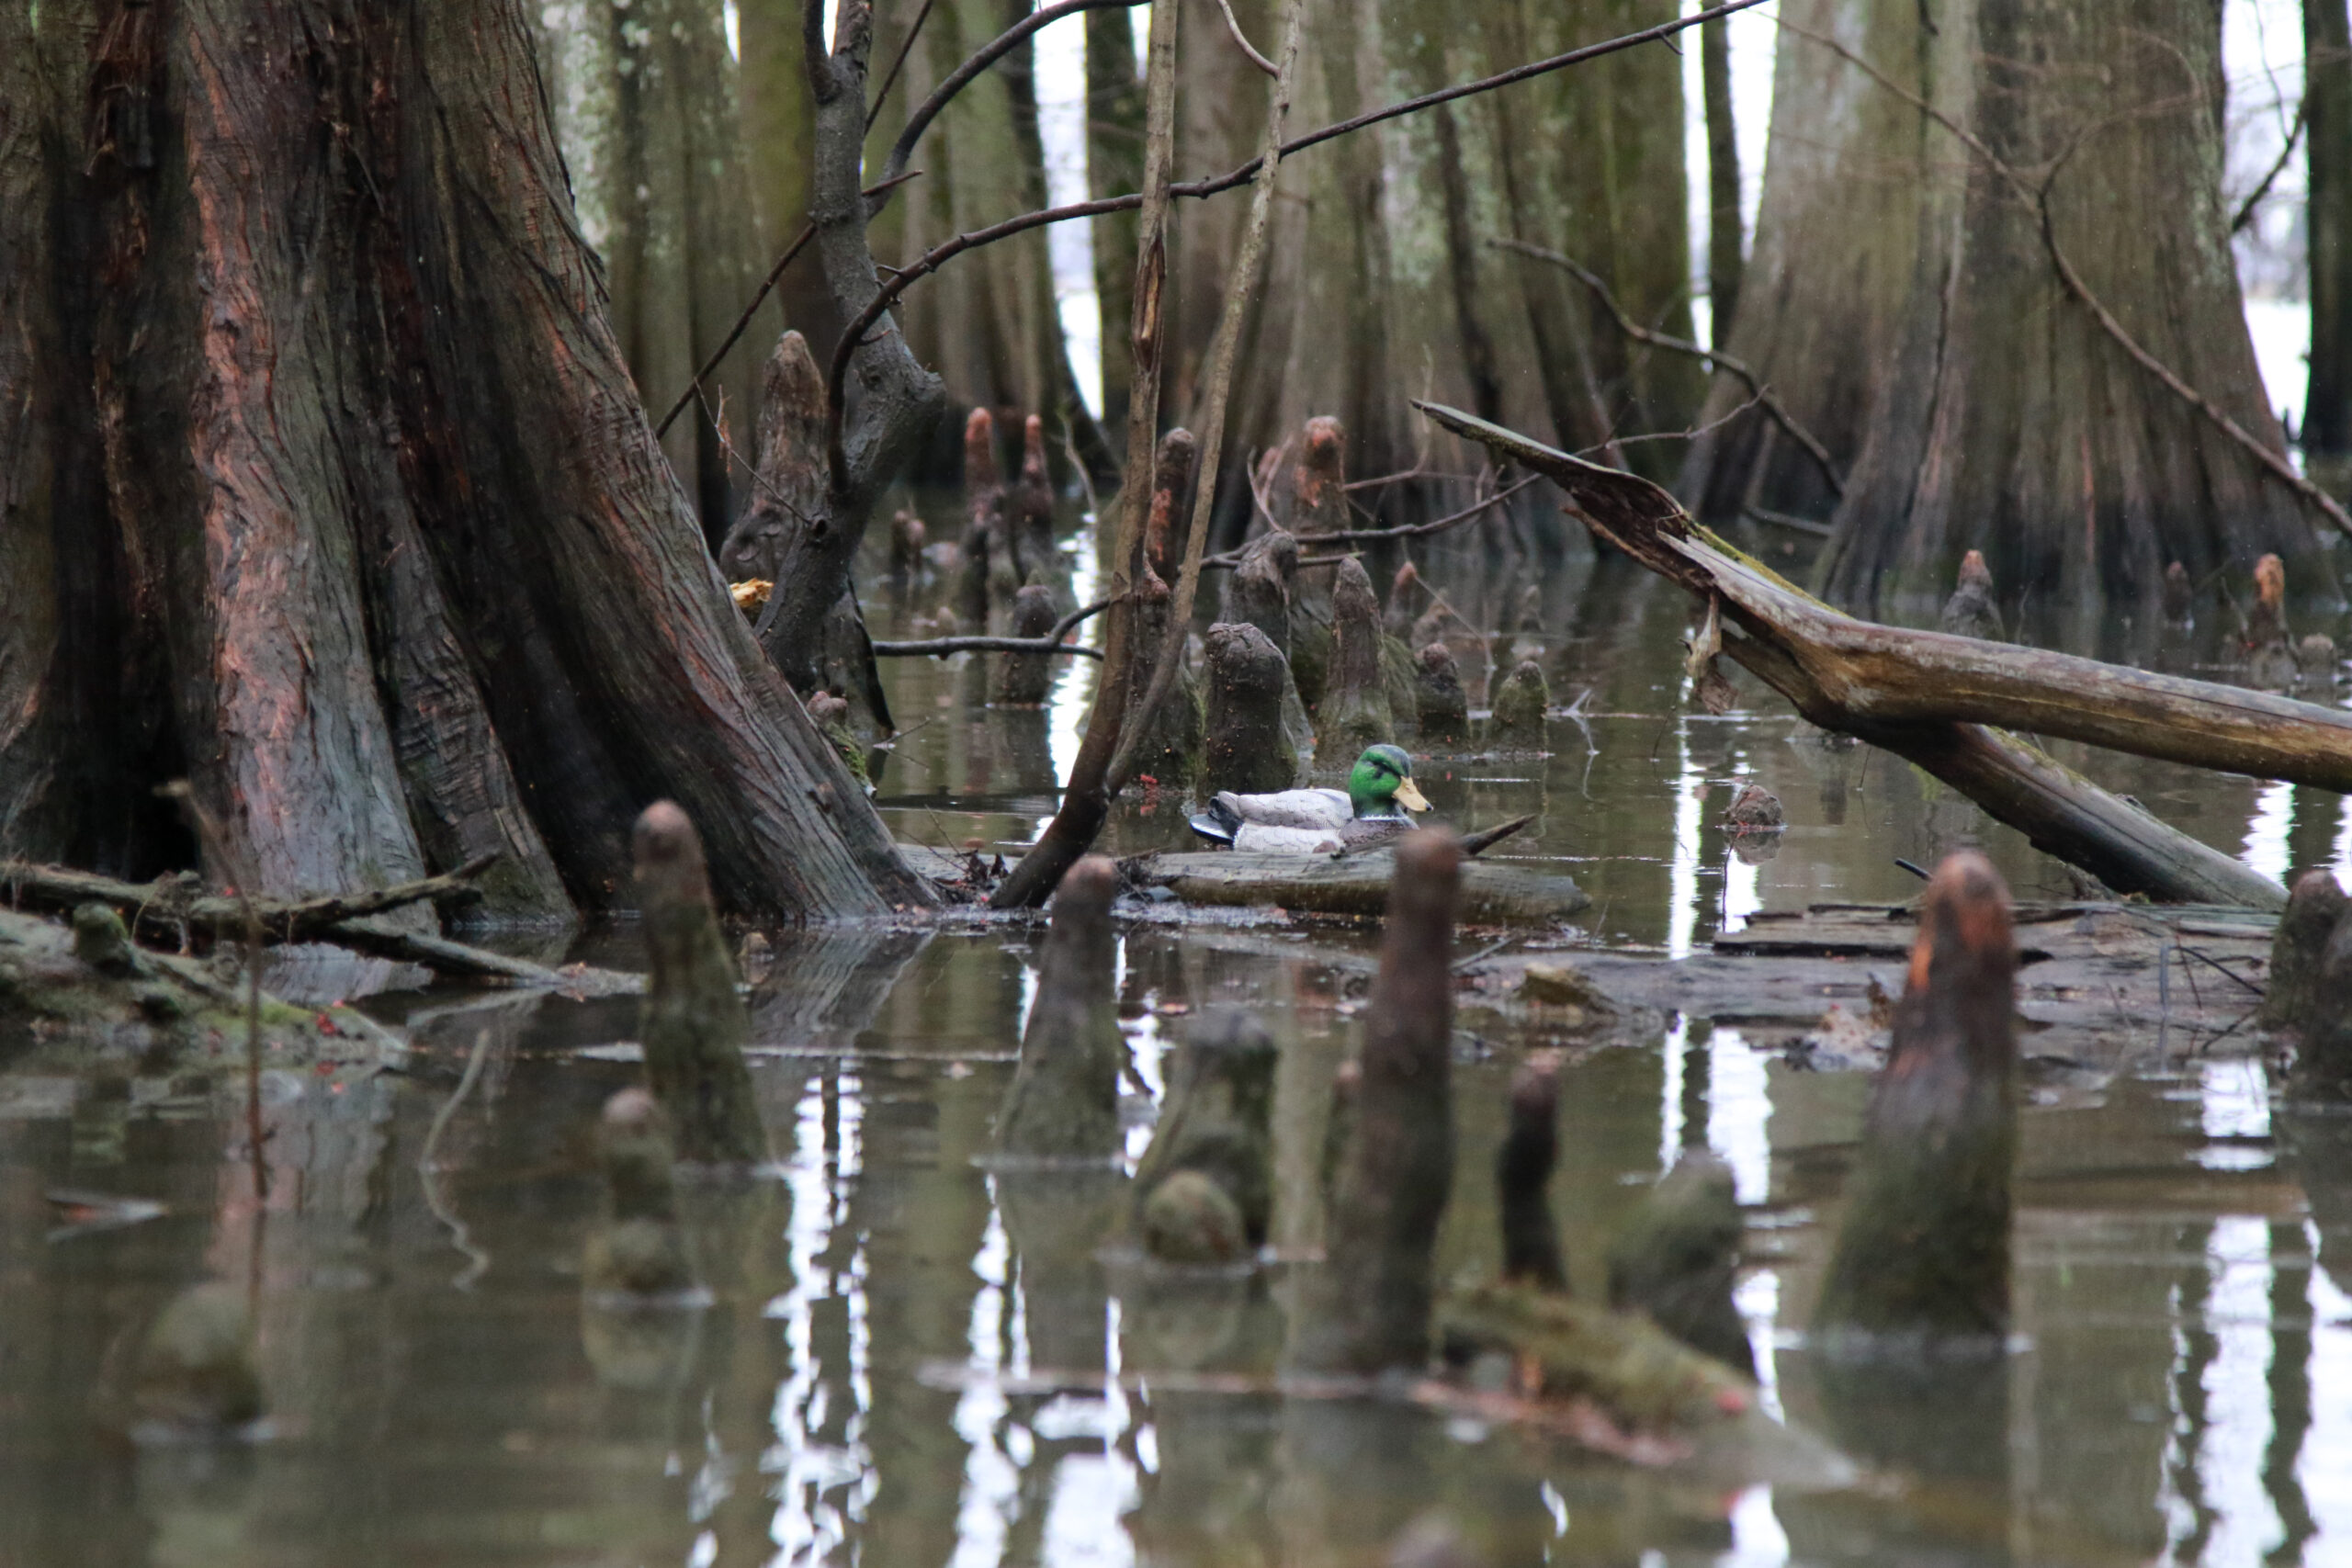 A loose decoy on Reelfoot Lake, which hunters were looking for when they found David Vowell.